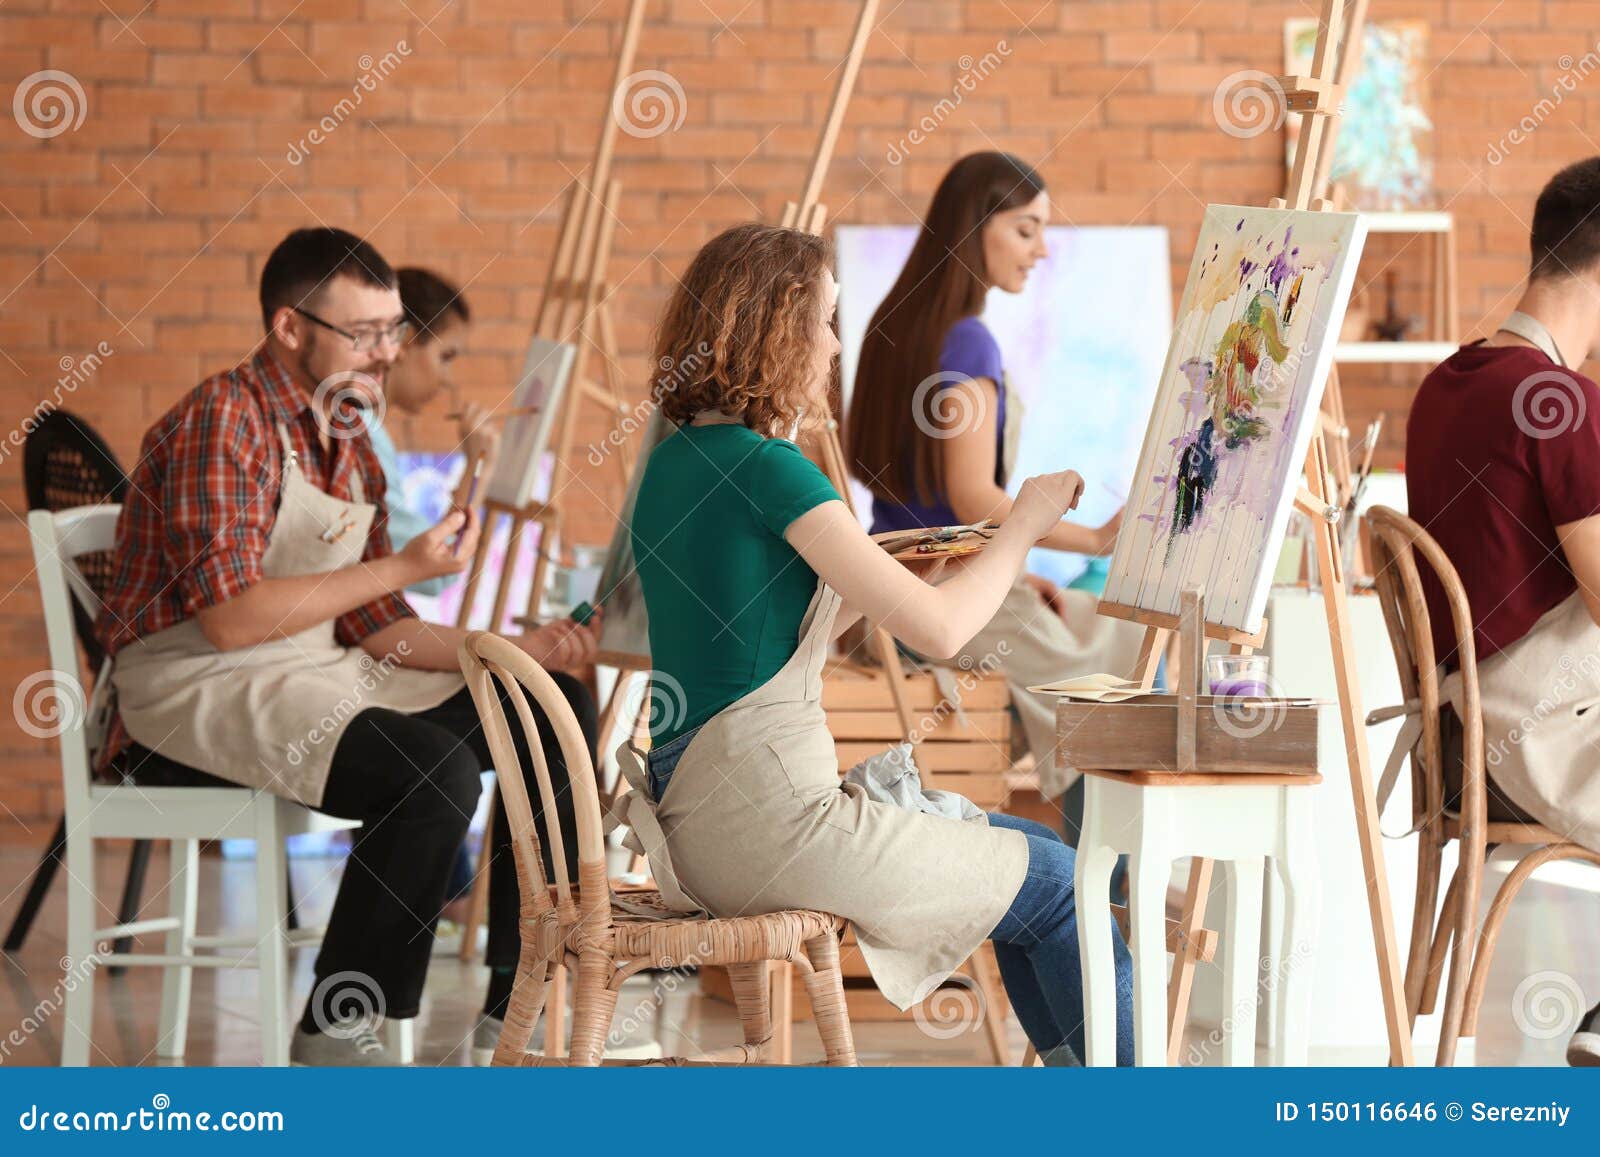 group of people during classes in school of painters